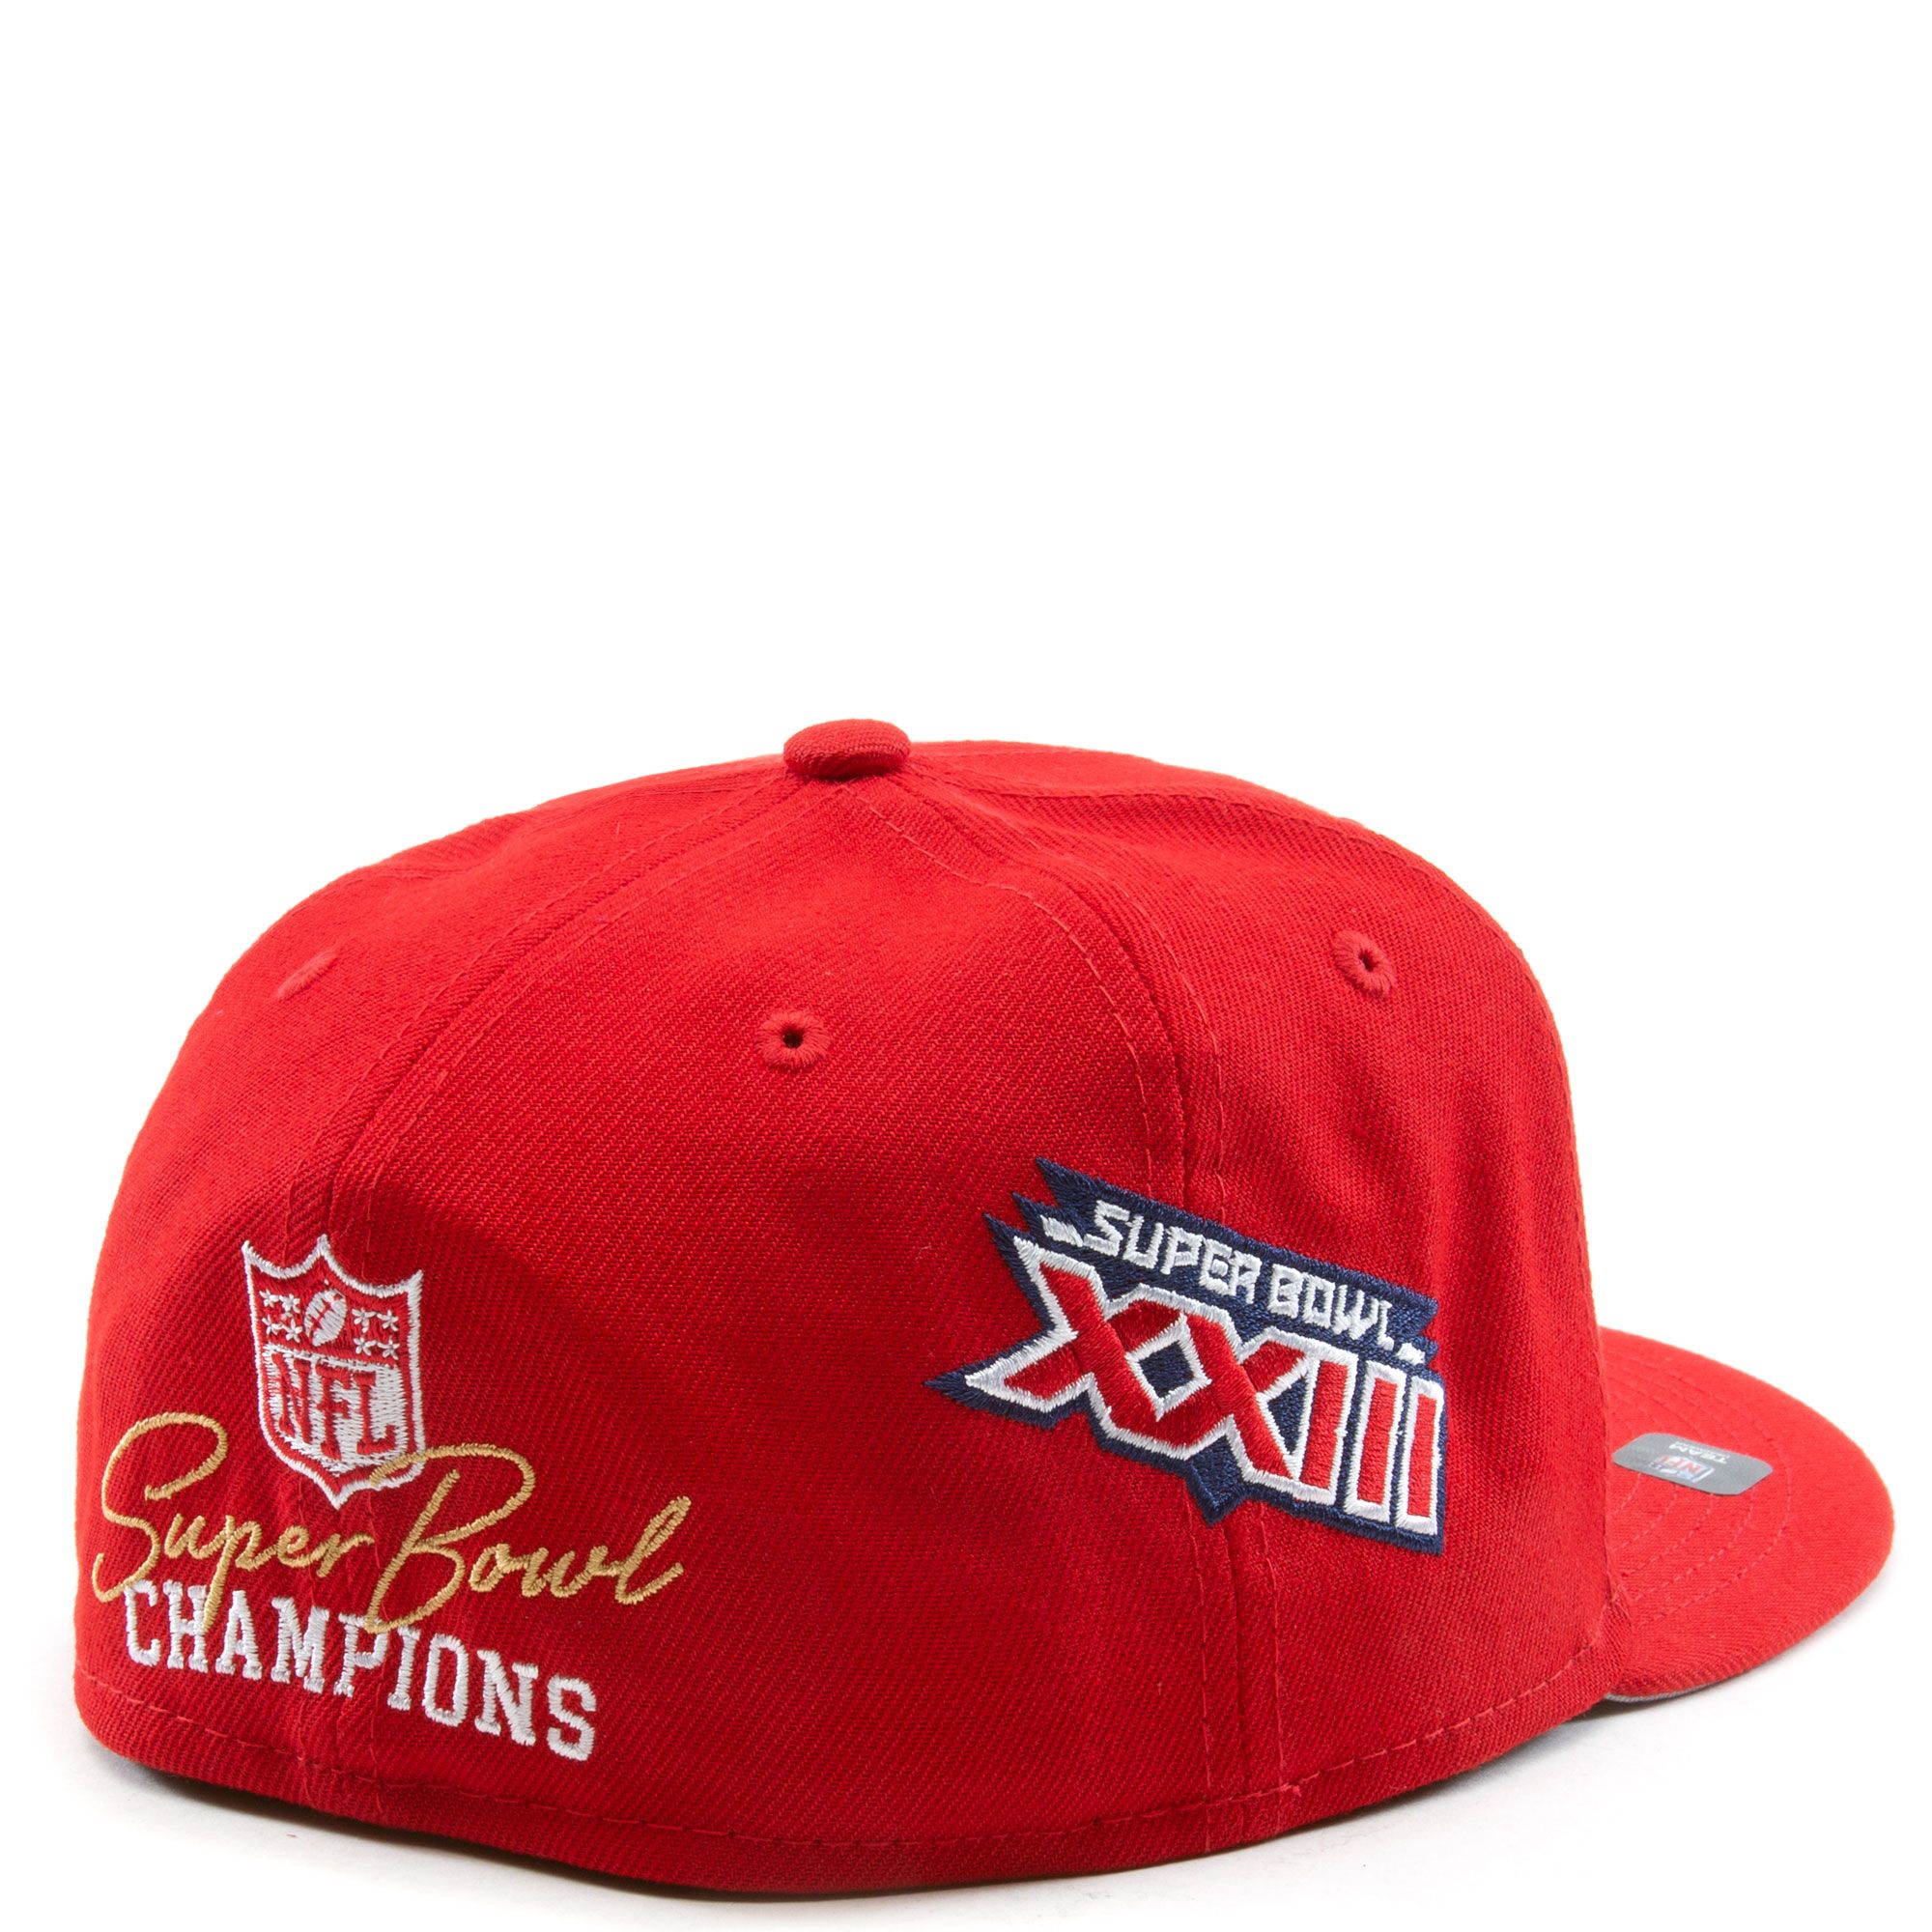 New Era Caps San Francisco 49ers Super Bowl XXIV 59FIFTY Fitted Hat Red